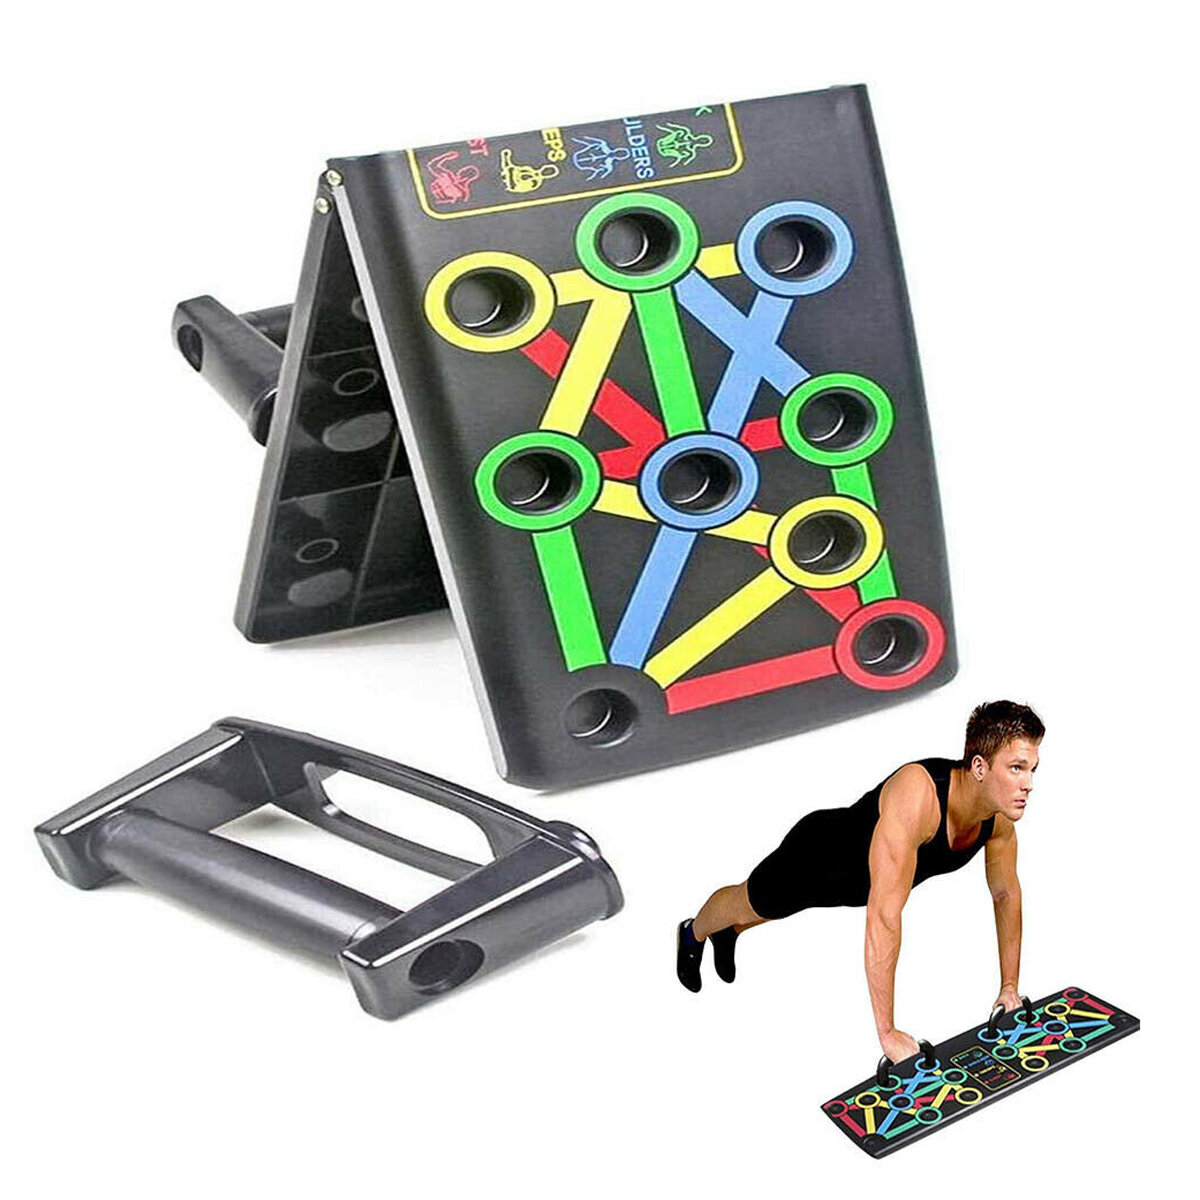 14 in 1 Foldable Muscle Board with Resistance Band, Details about   JOYXEON Push Up Board 